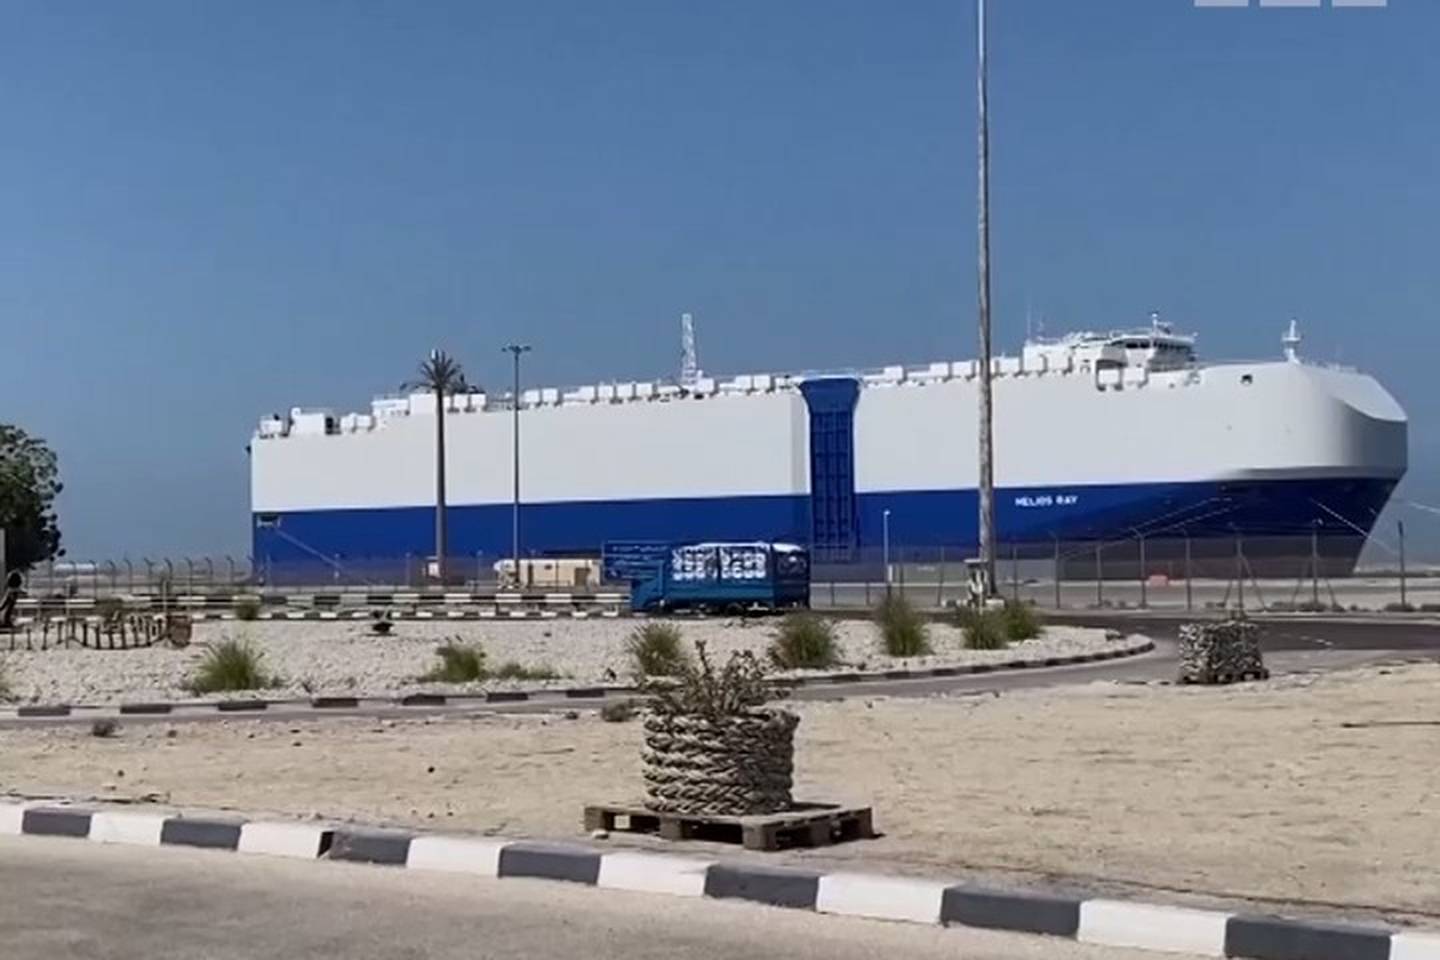  Israeli-owned ship hit by explosion arrives in Dubai